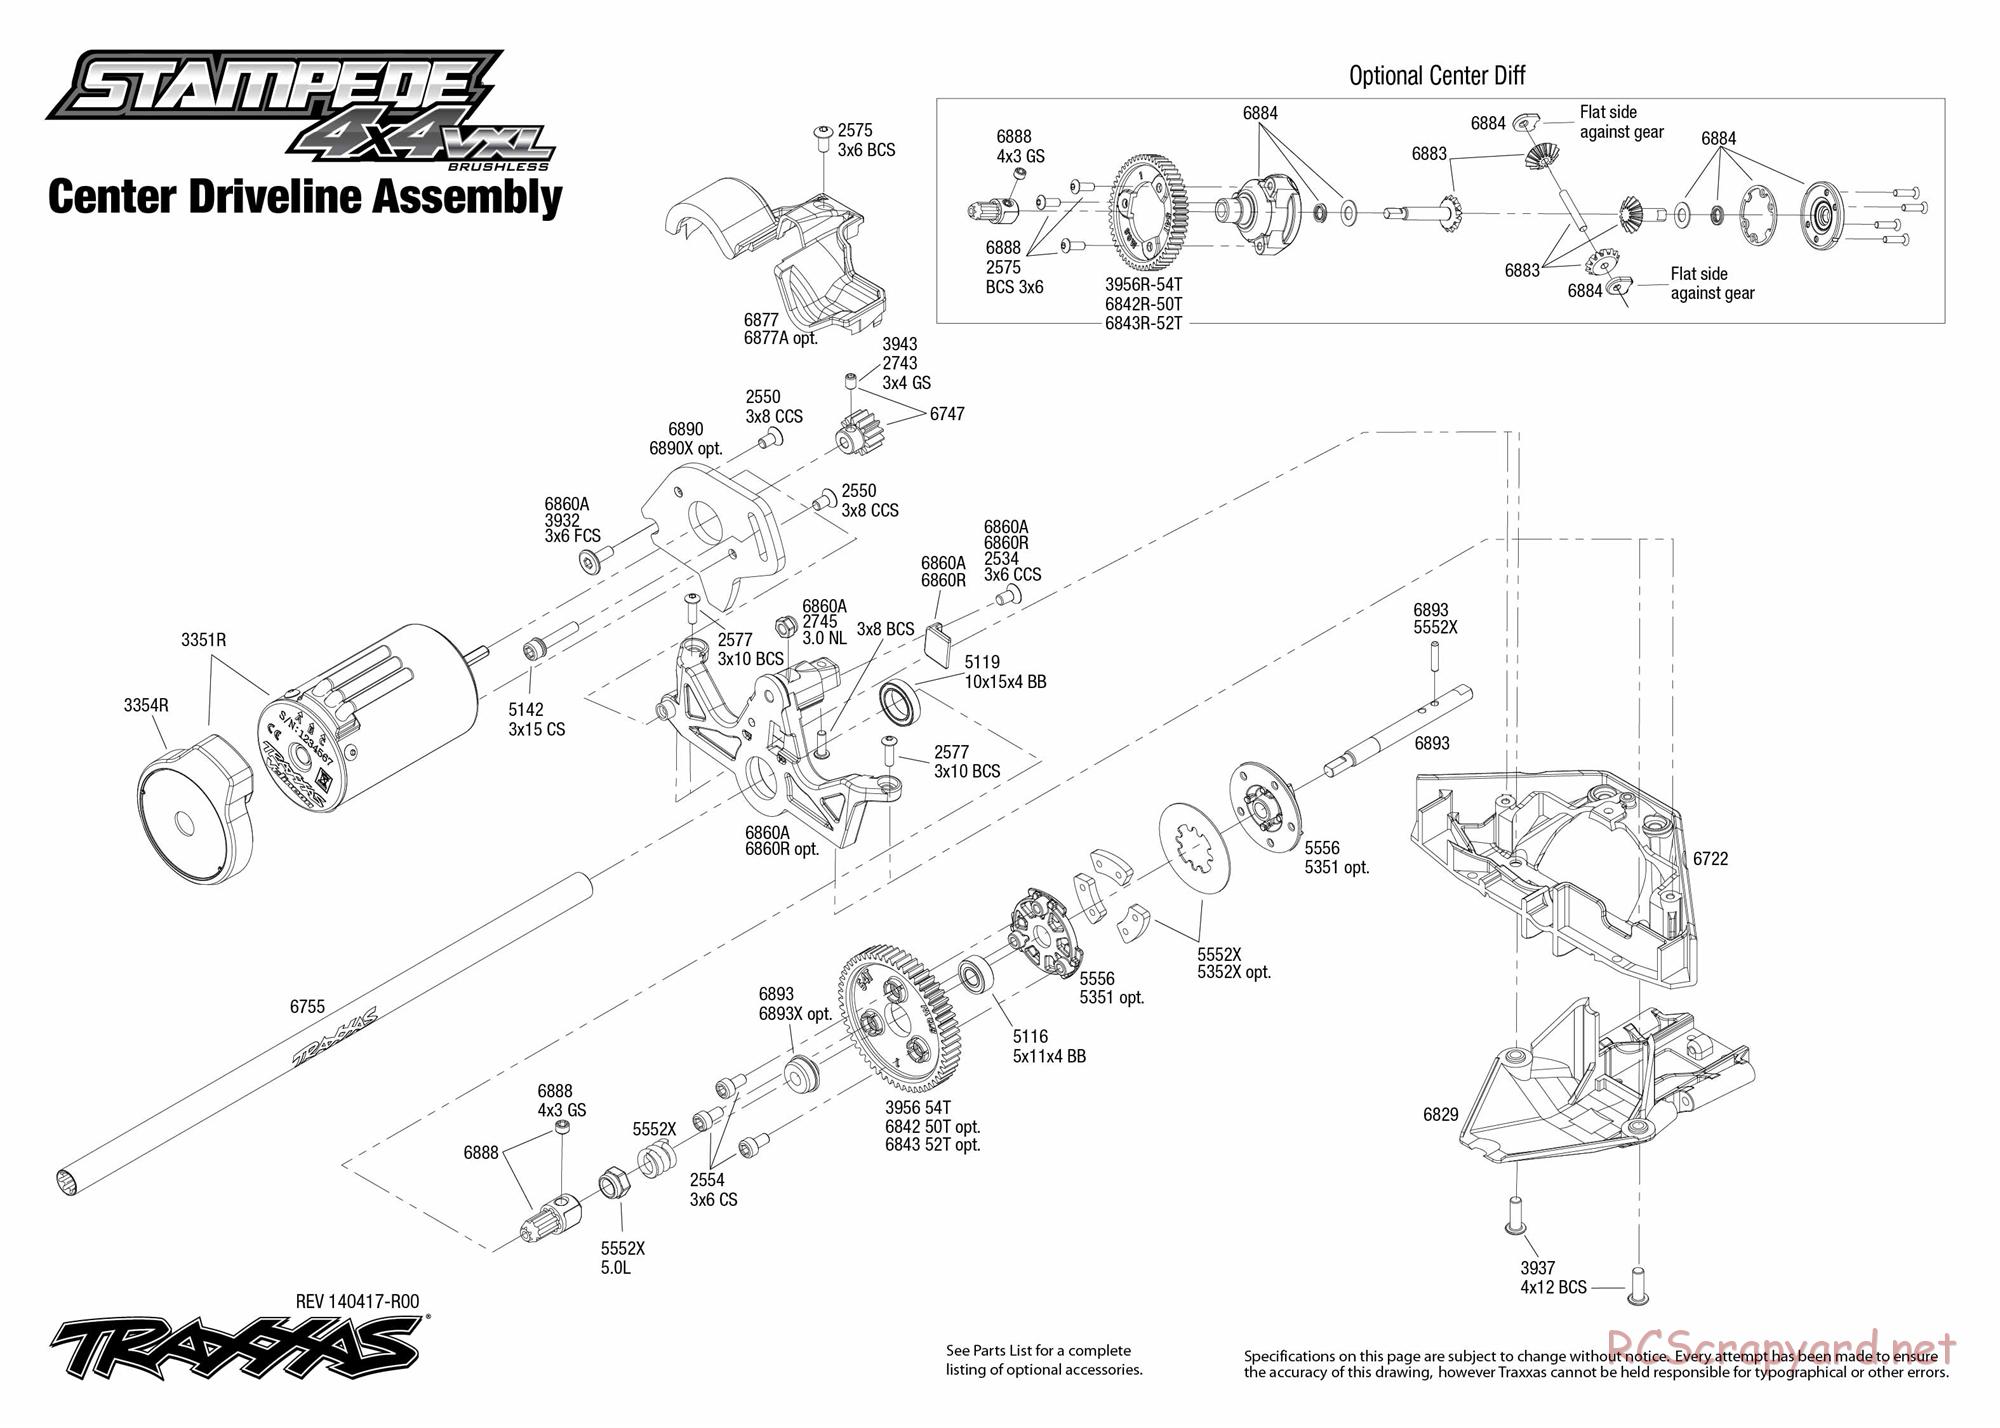 Traxxas - Stampede 4x4 VXL (2014) - Exploded Views - Page 5